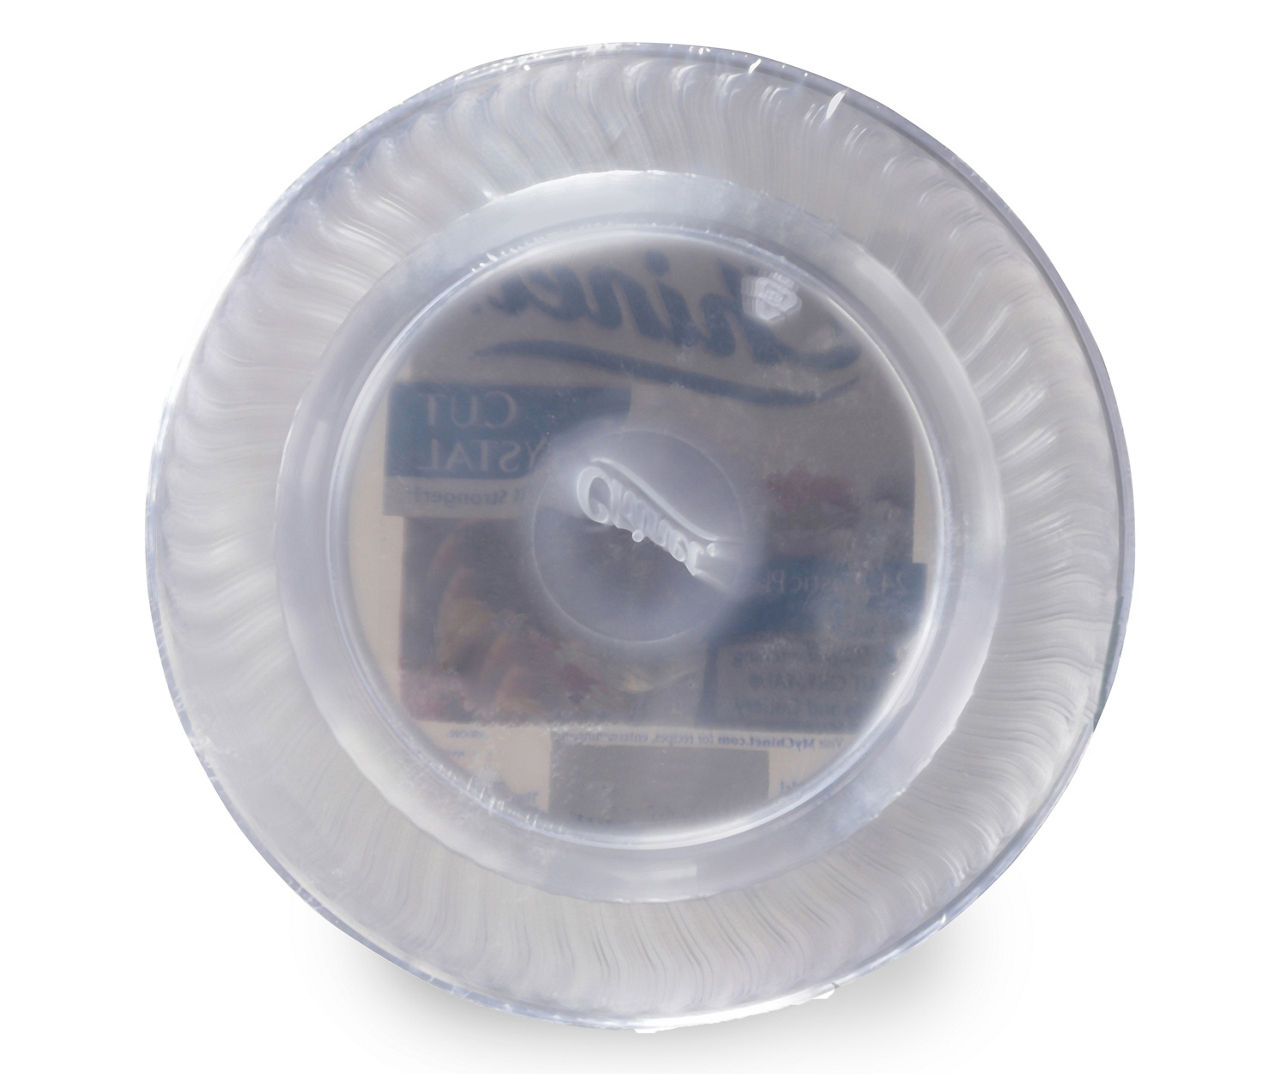 Chinet Cut Crystal 7-Inch Plastic Plates, 24 ct - City Market